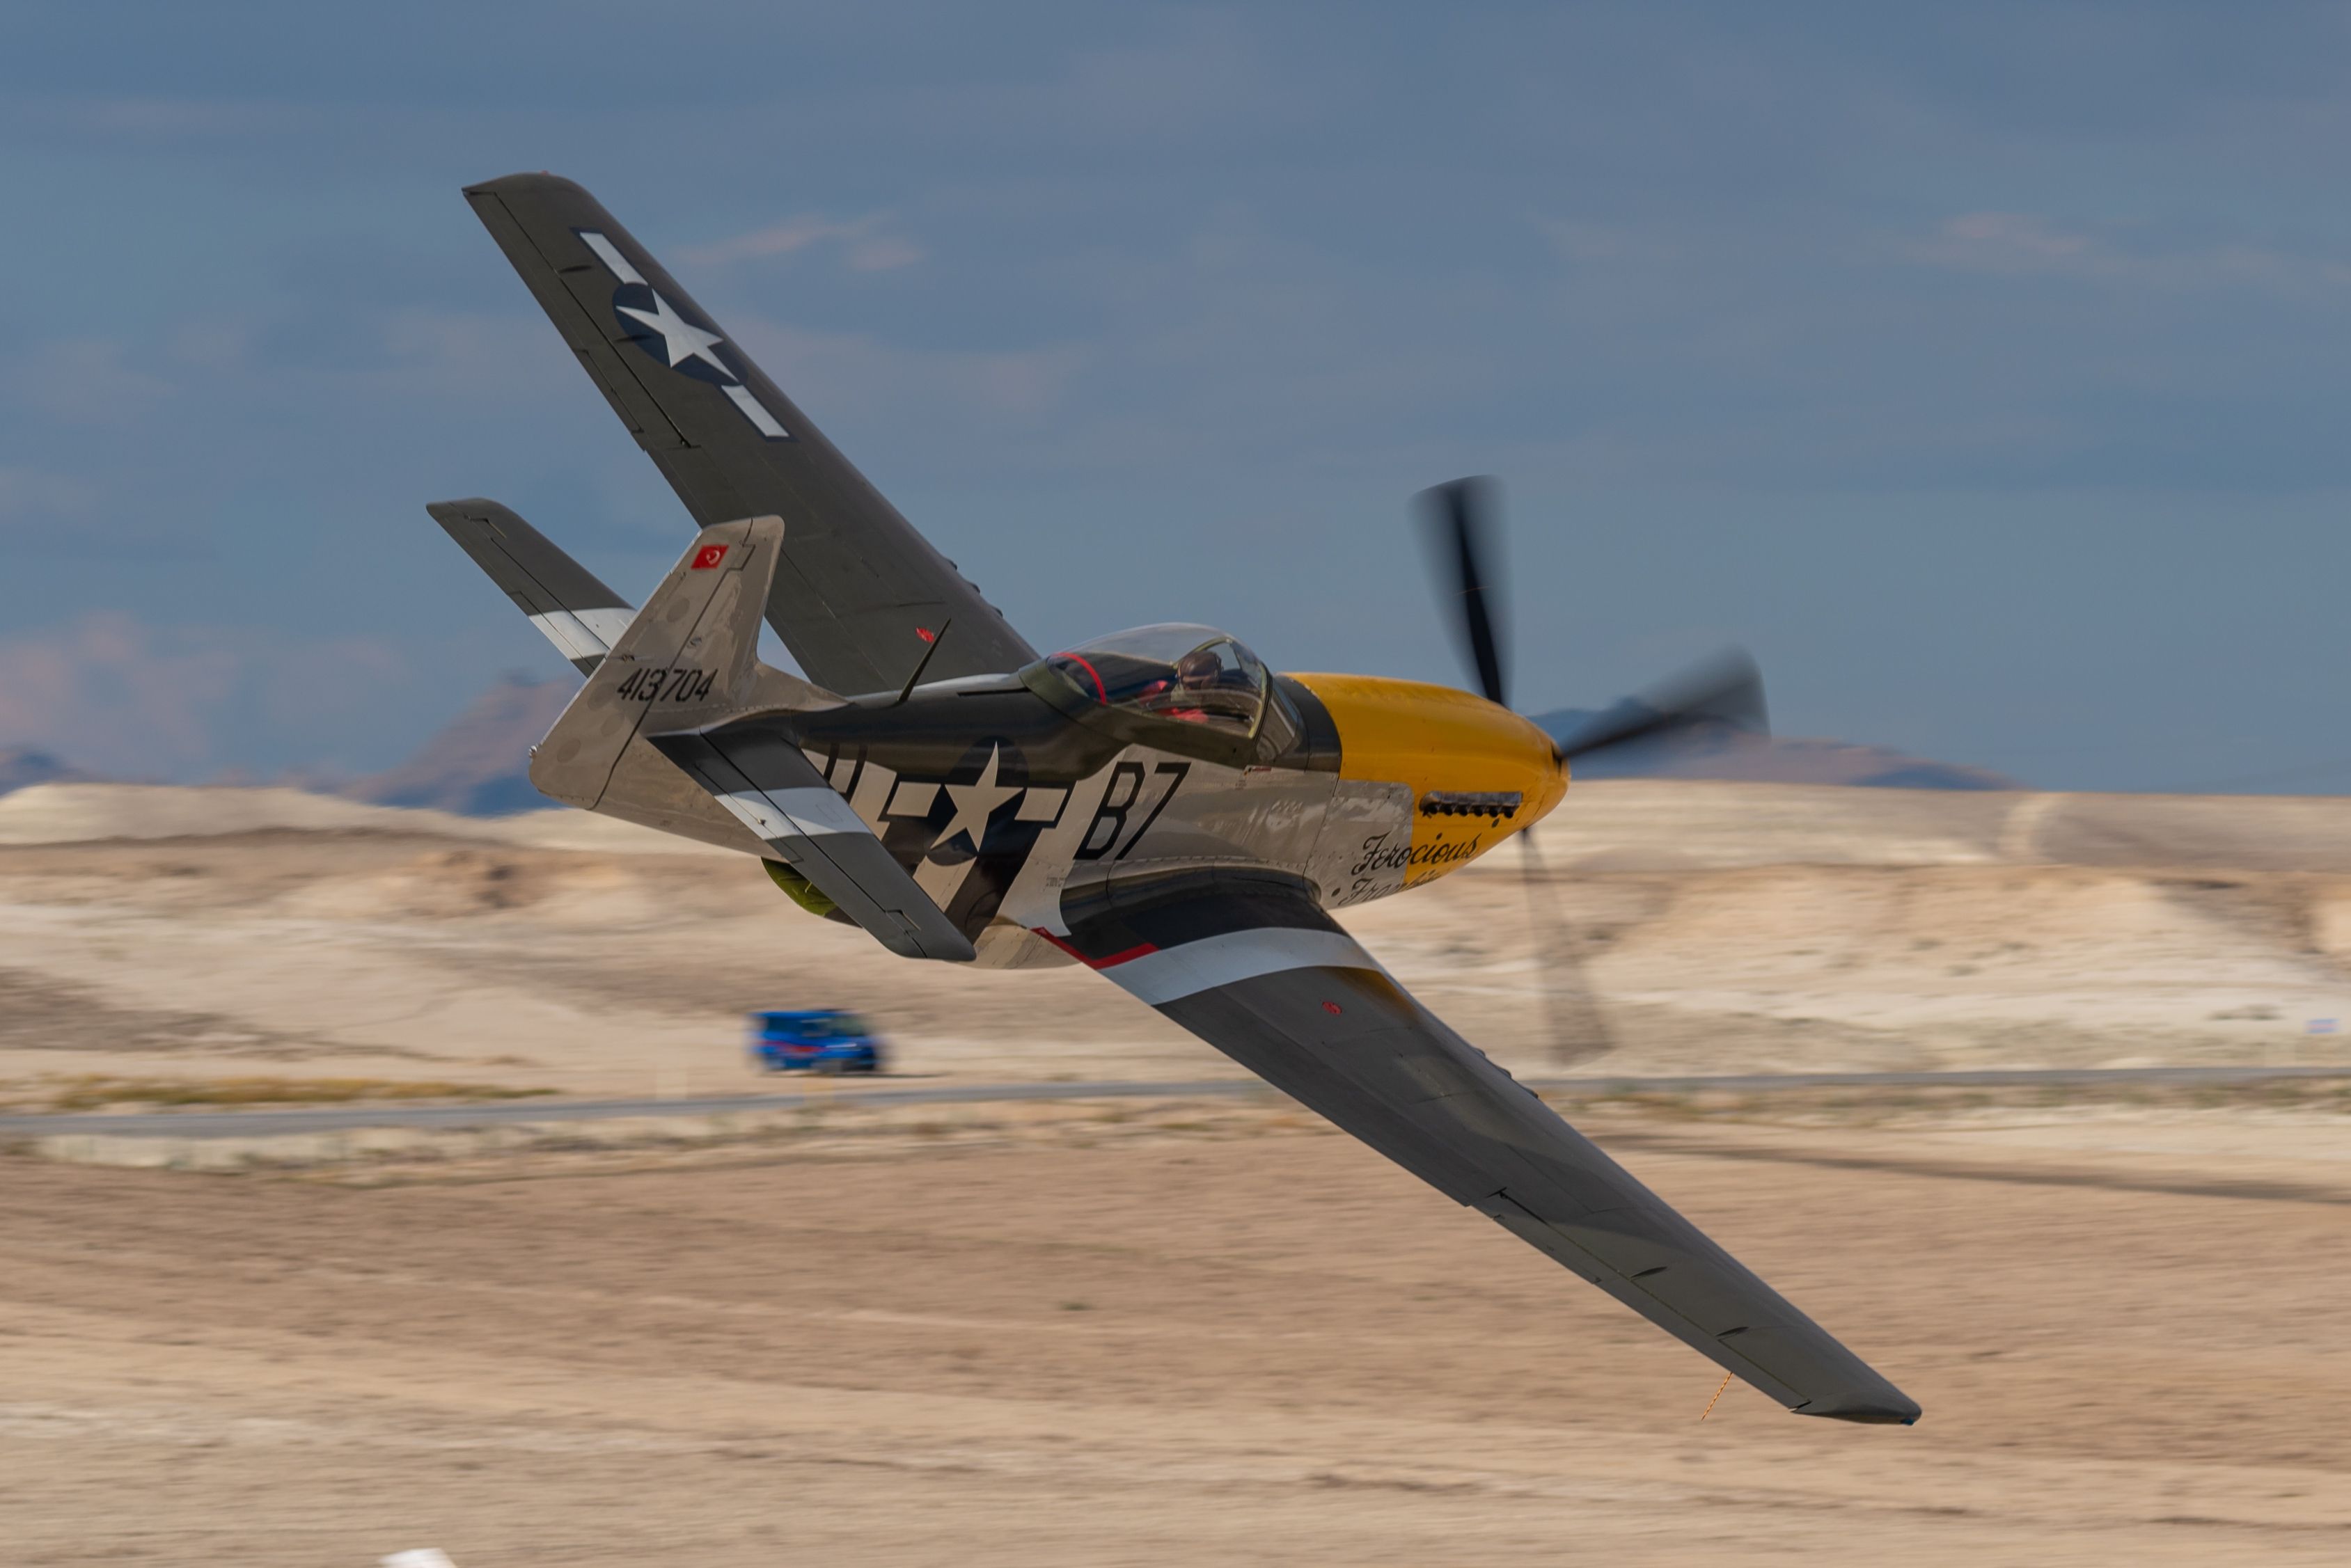 The P-51 Mustang flying